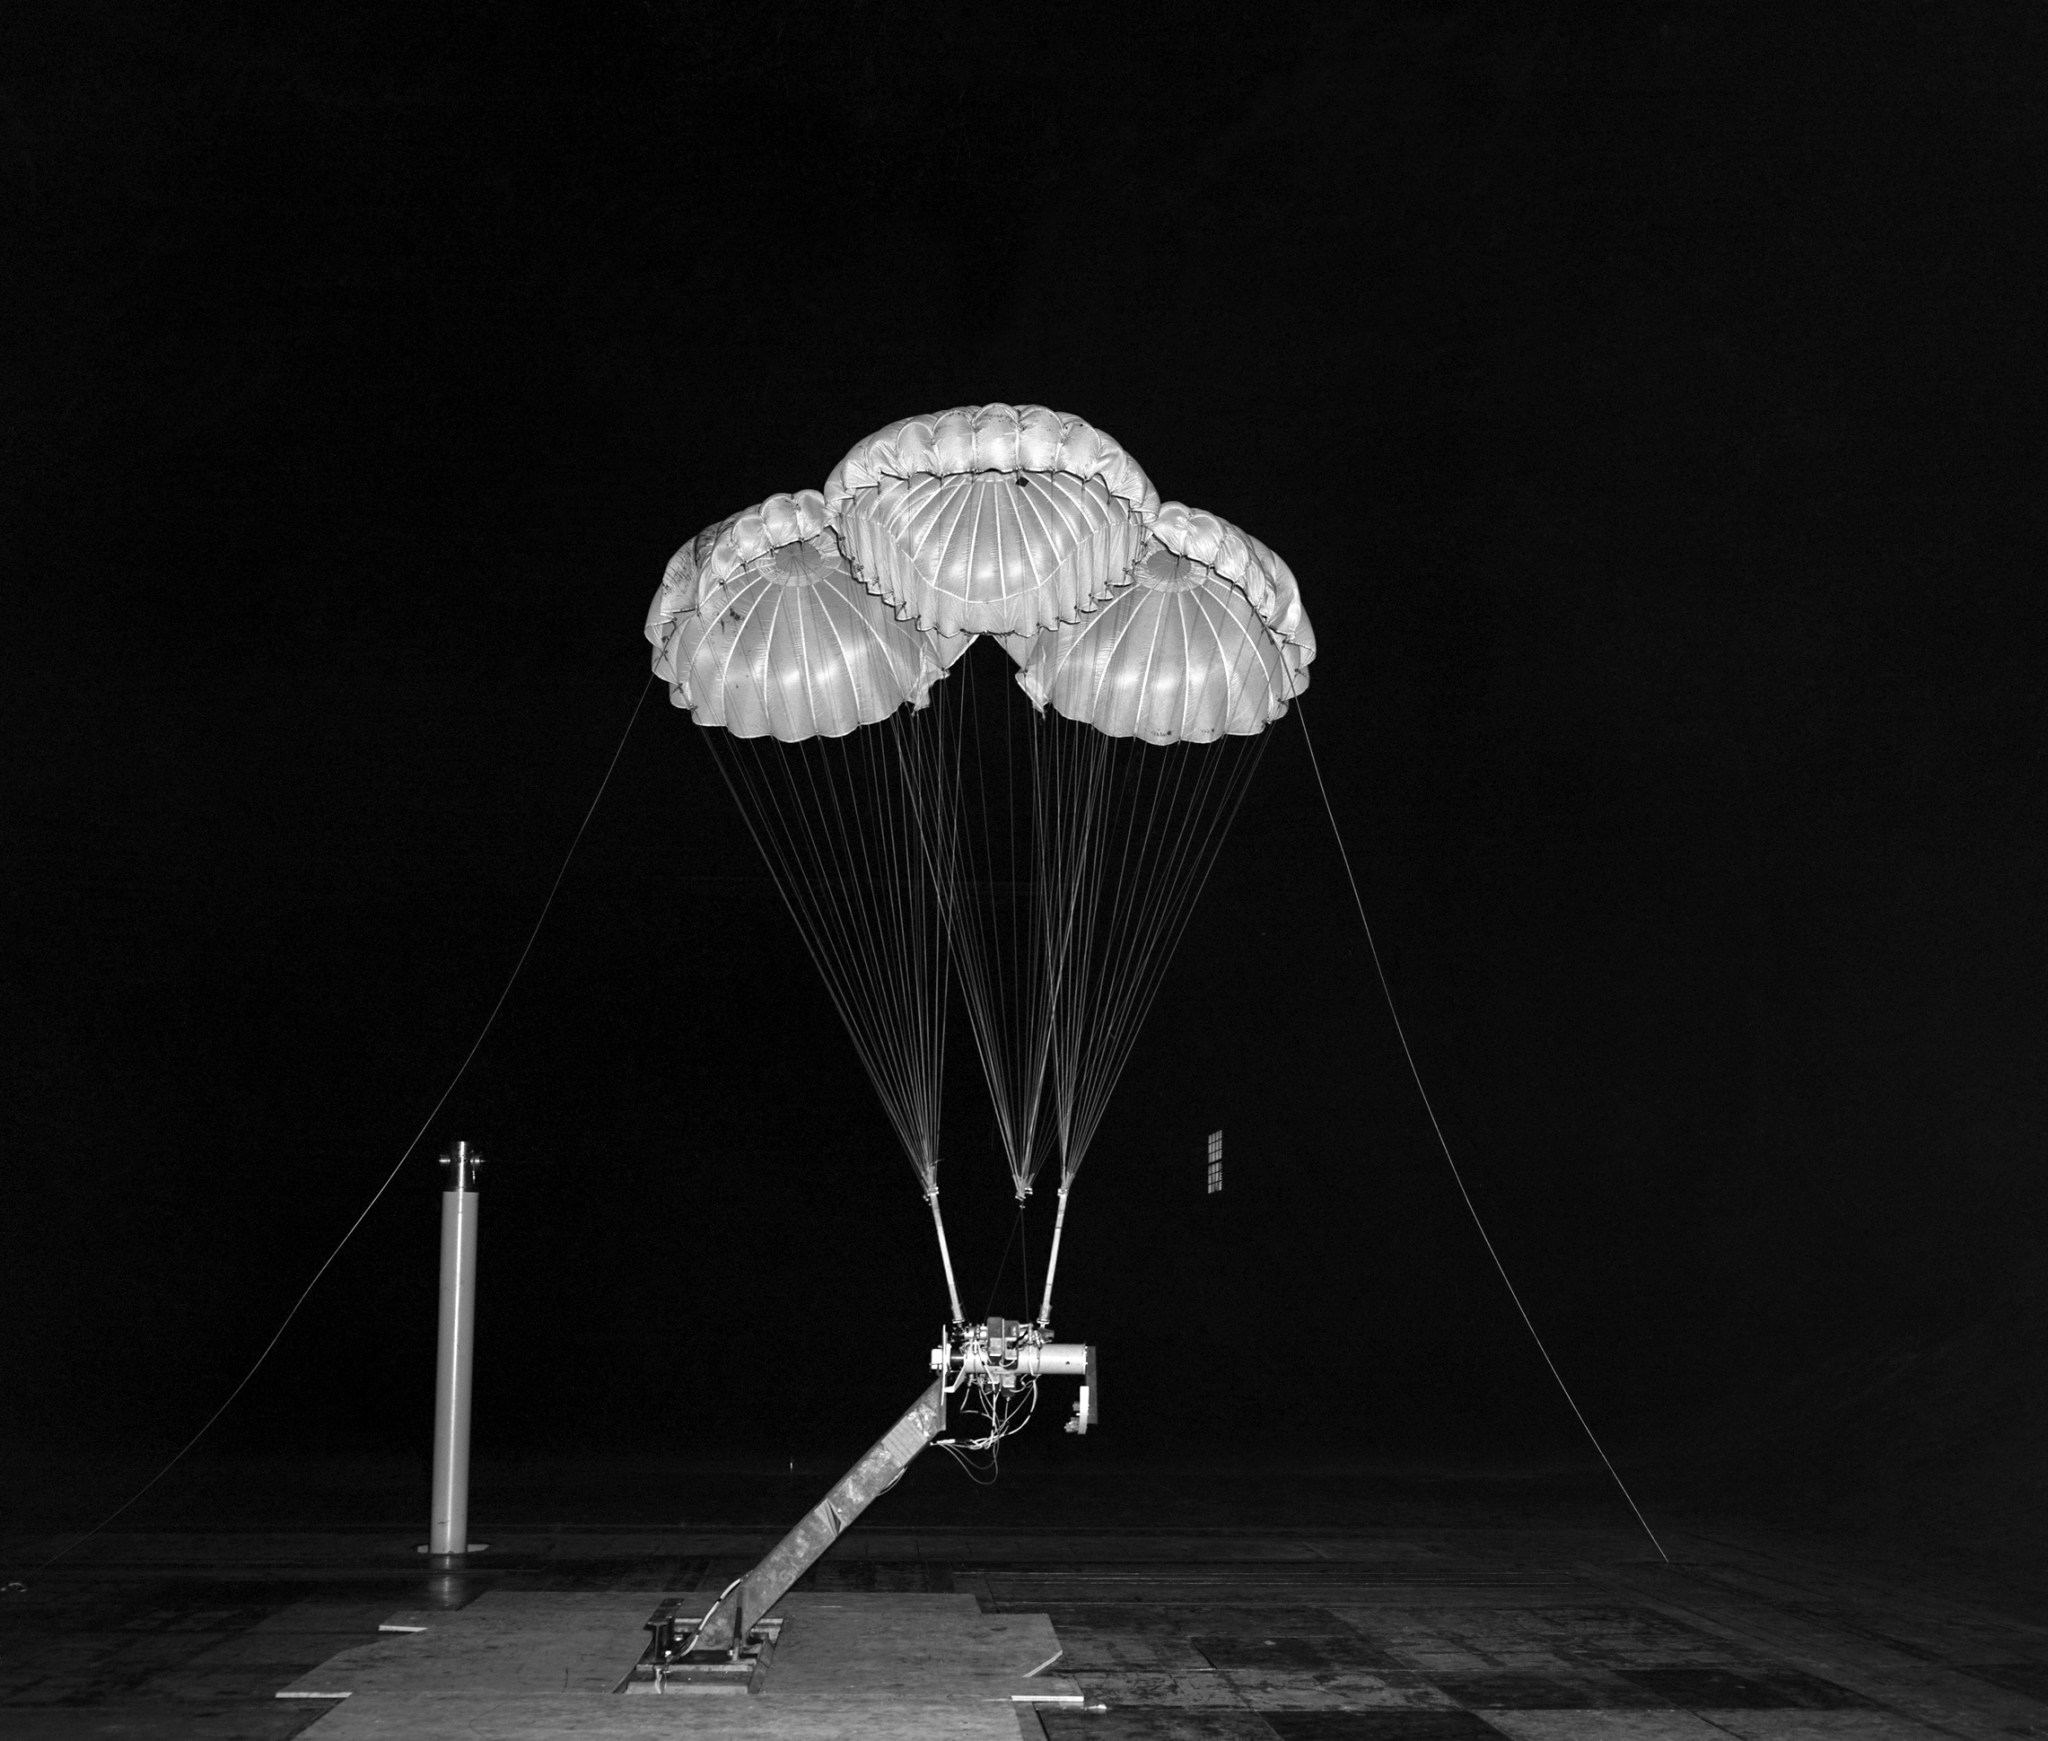 Parachutes from the Apollo era open for testing in a wind tunnel.